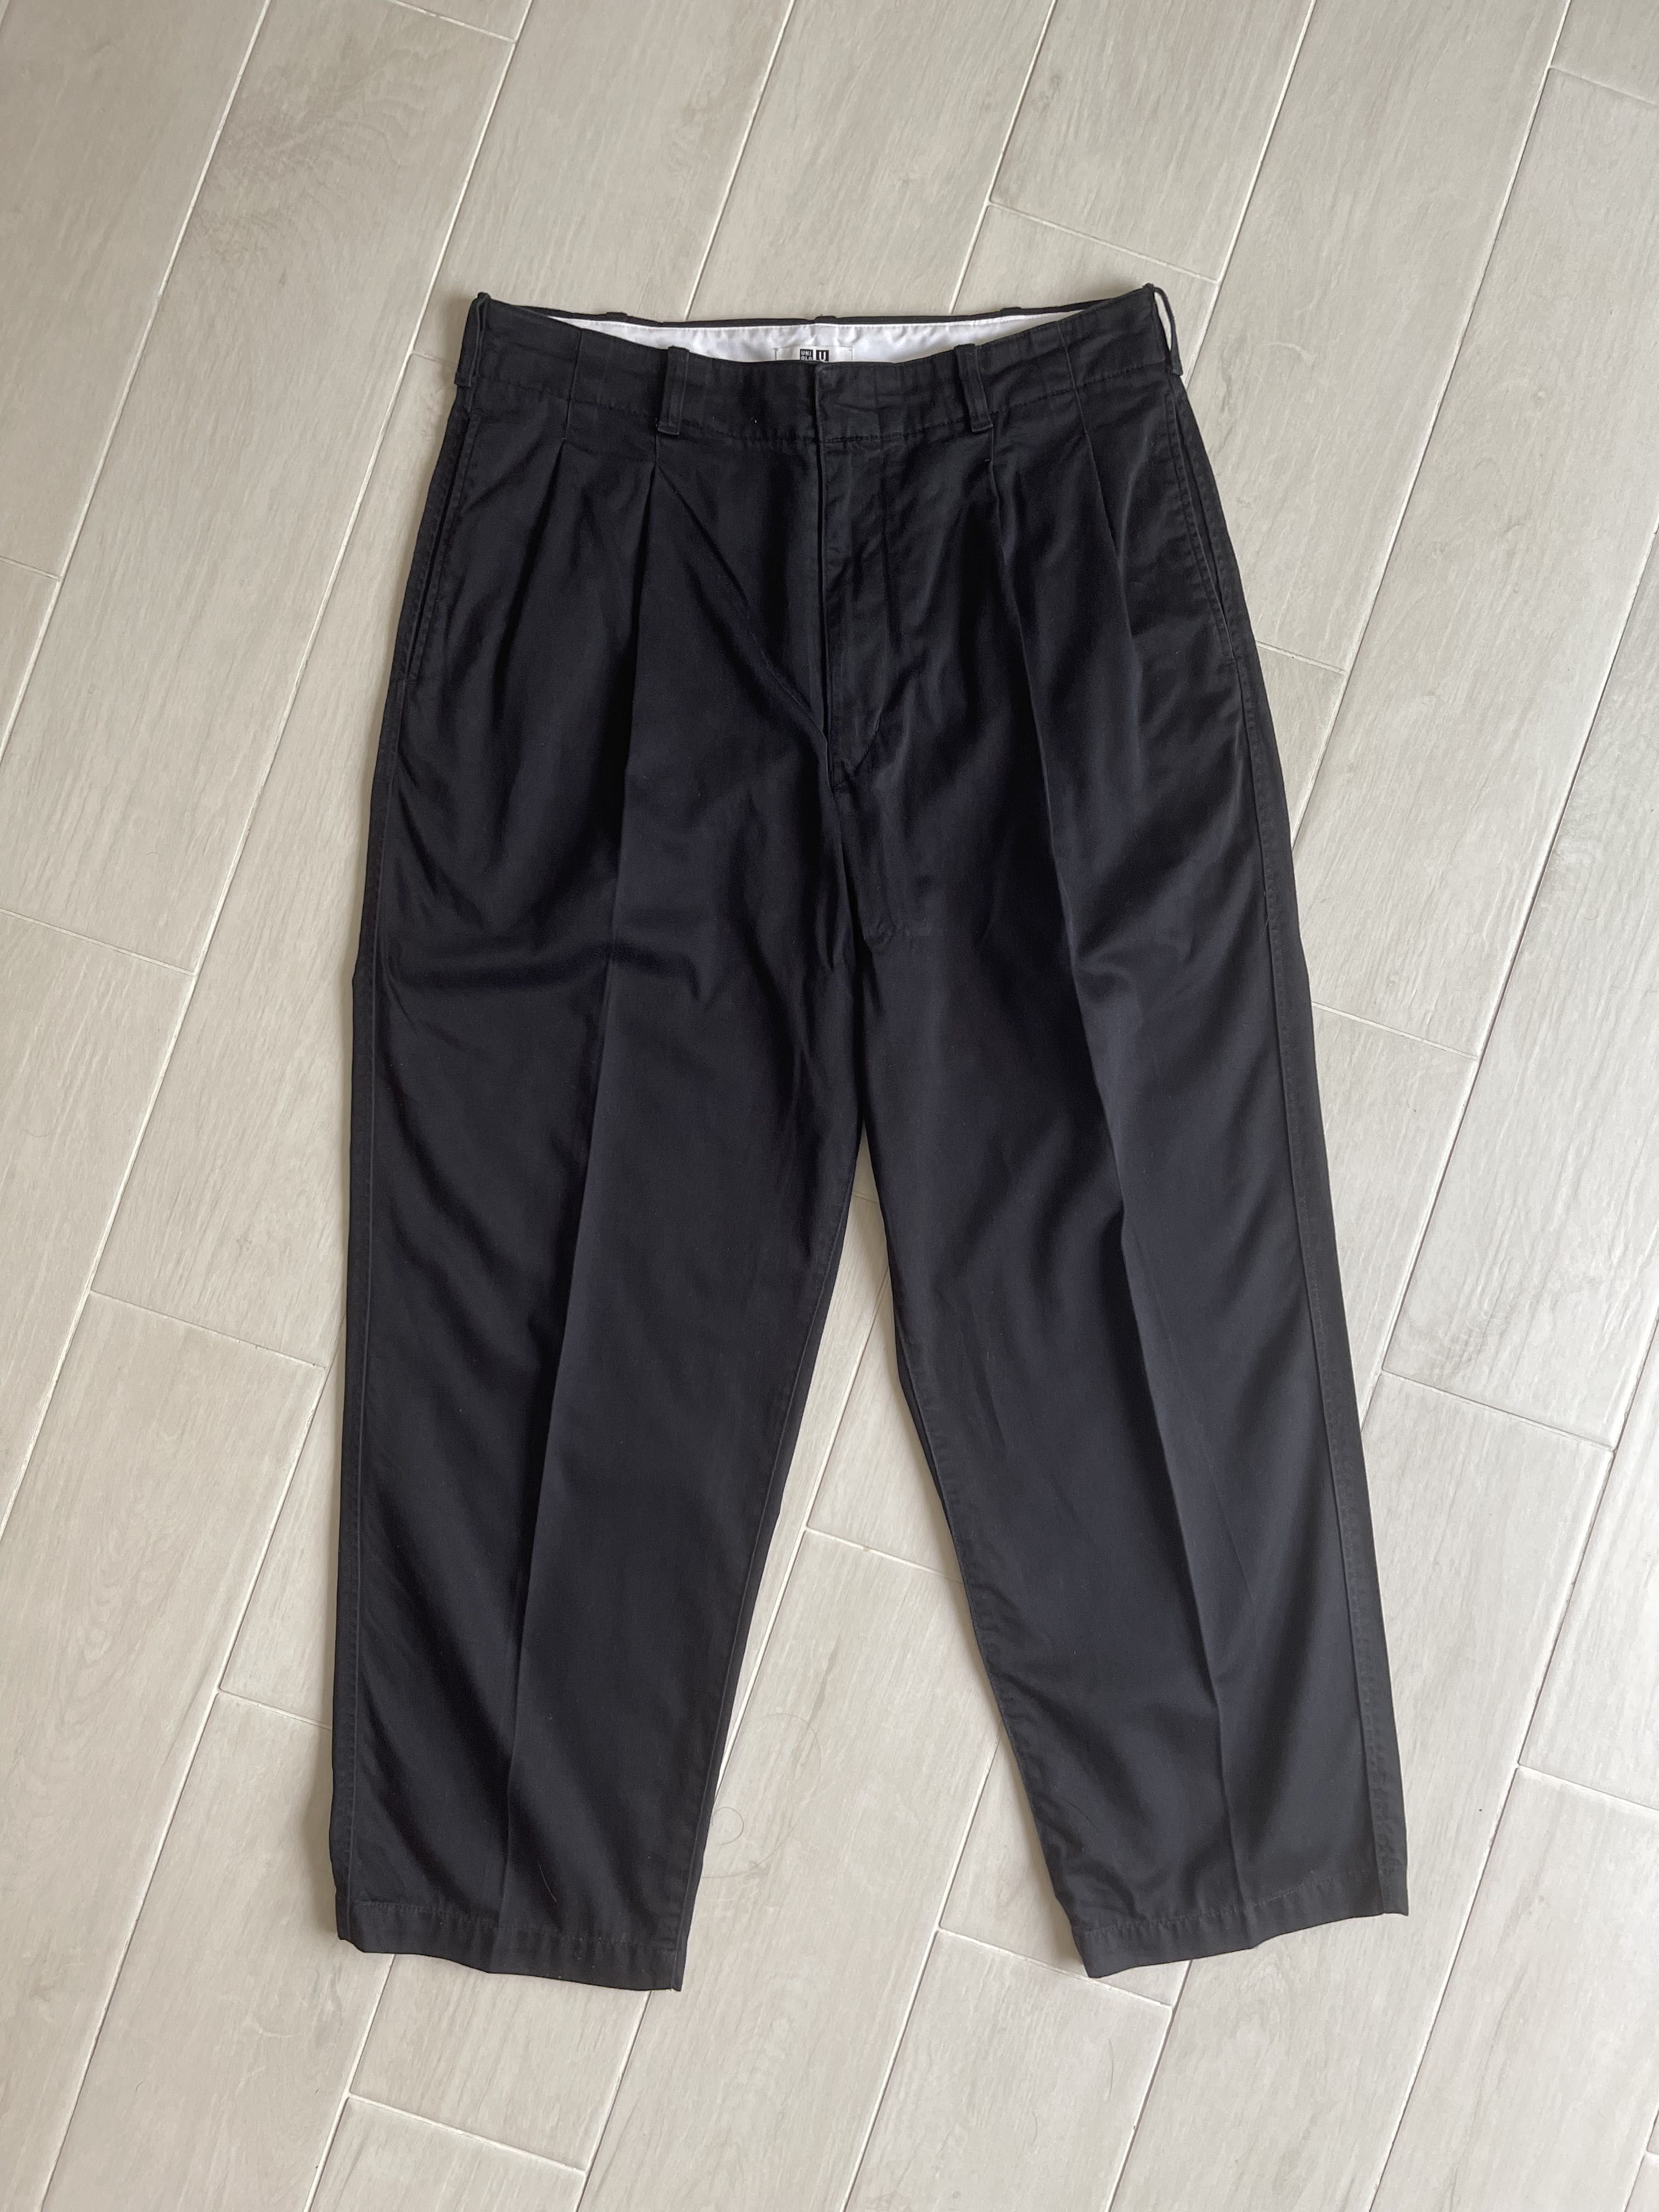 Men Uniqlo U wide fit pleated tapered pants, Men's Fashion